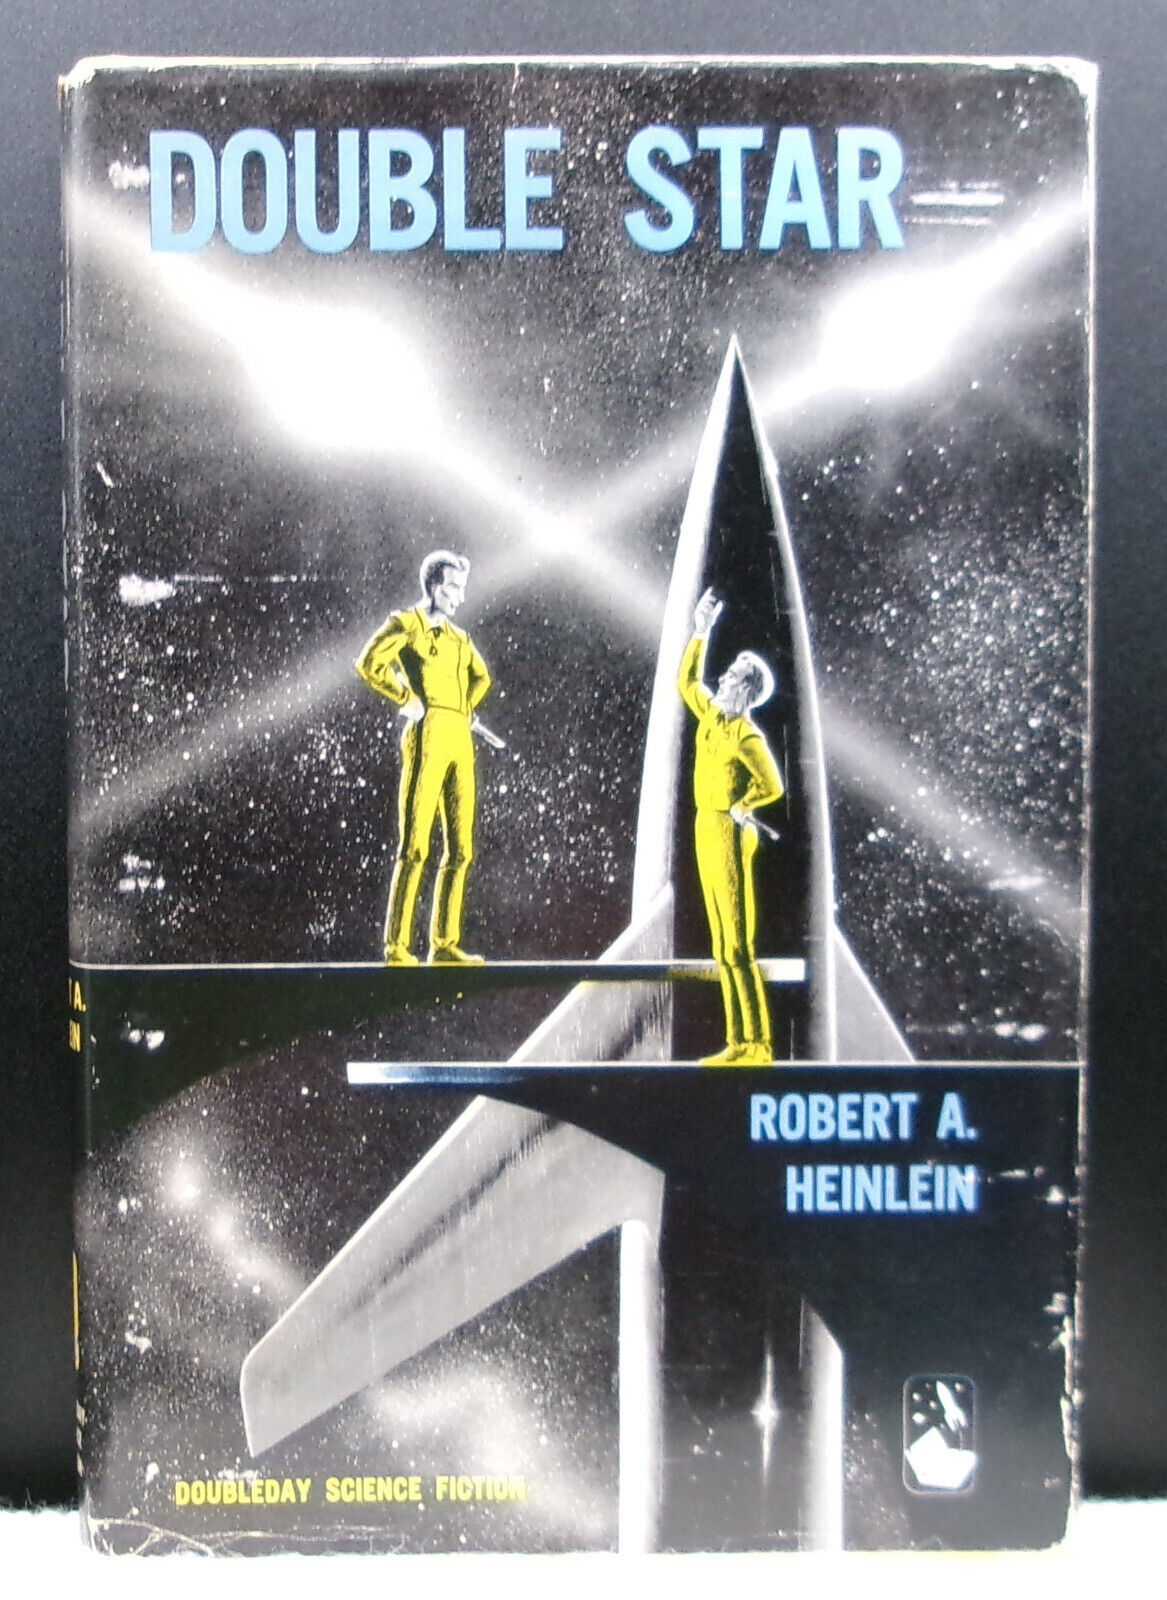 Primary image for Robert Heinlein DOUBLE STAR 1956 Hardcover DJ Science Fiction Actor Spaceship